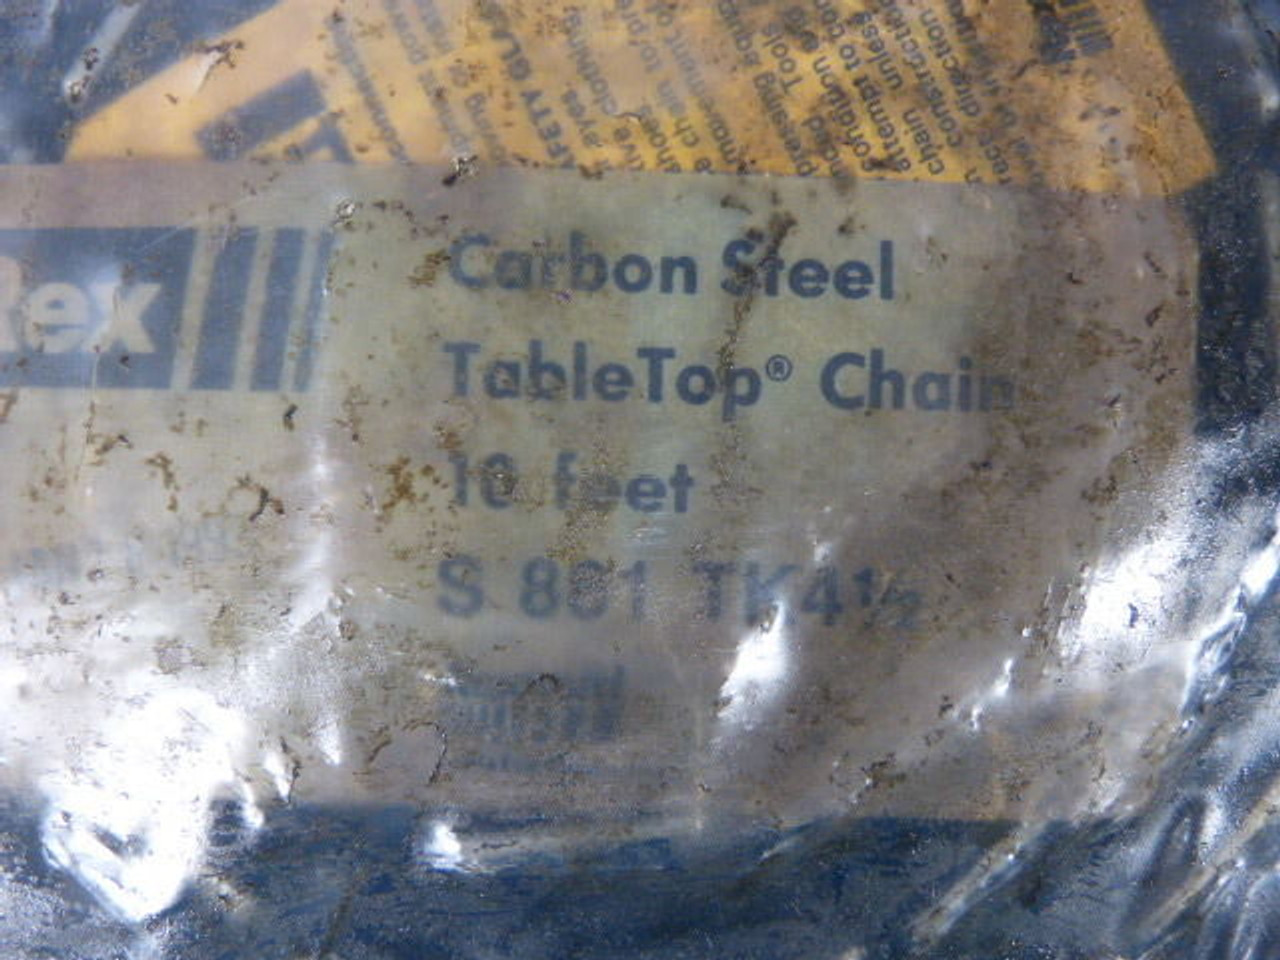 Rex S-881-TK4-1/2 Carbon Steel Table Top Chain ! NEW !